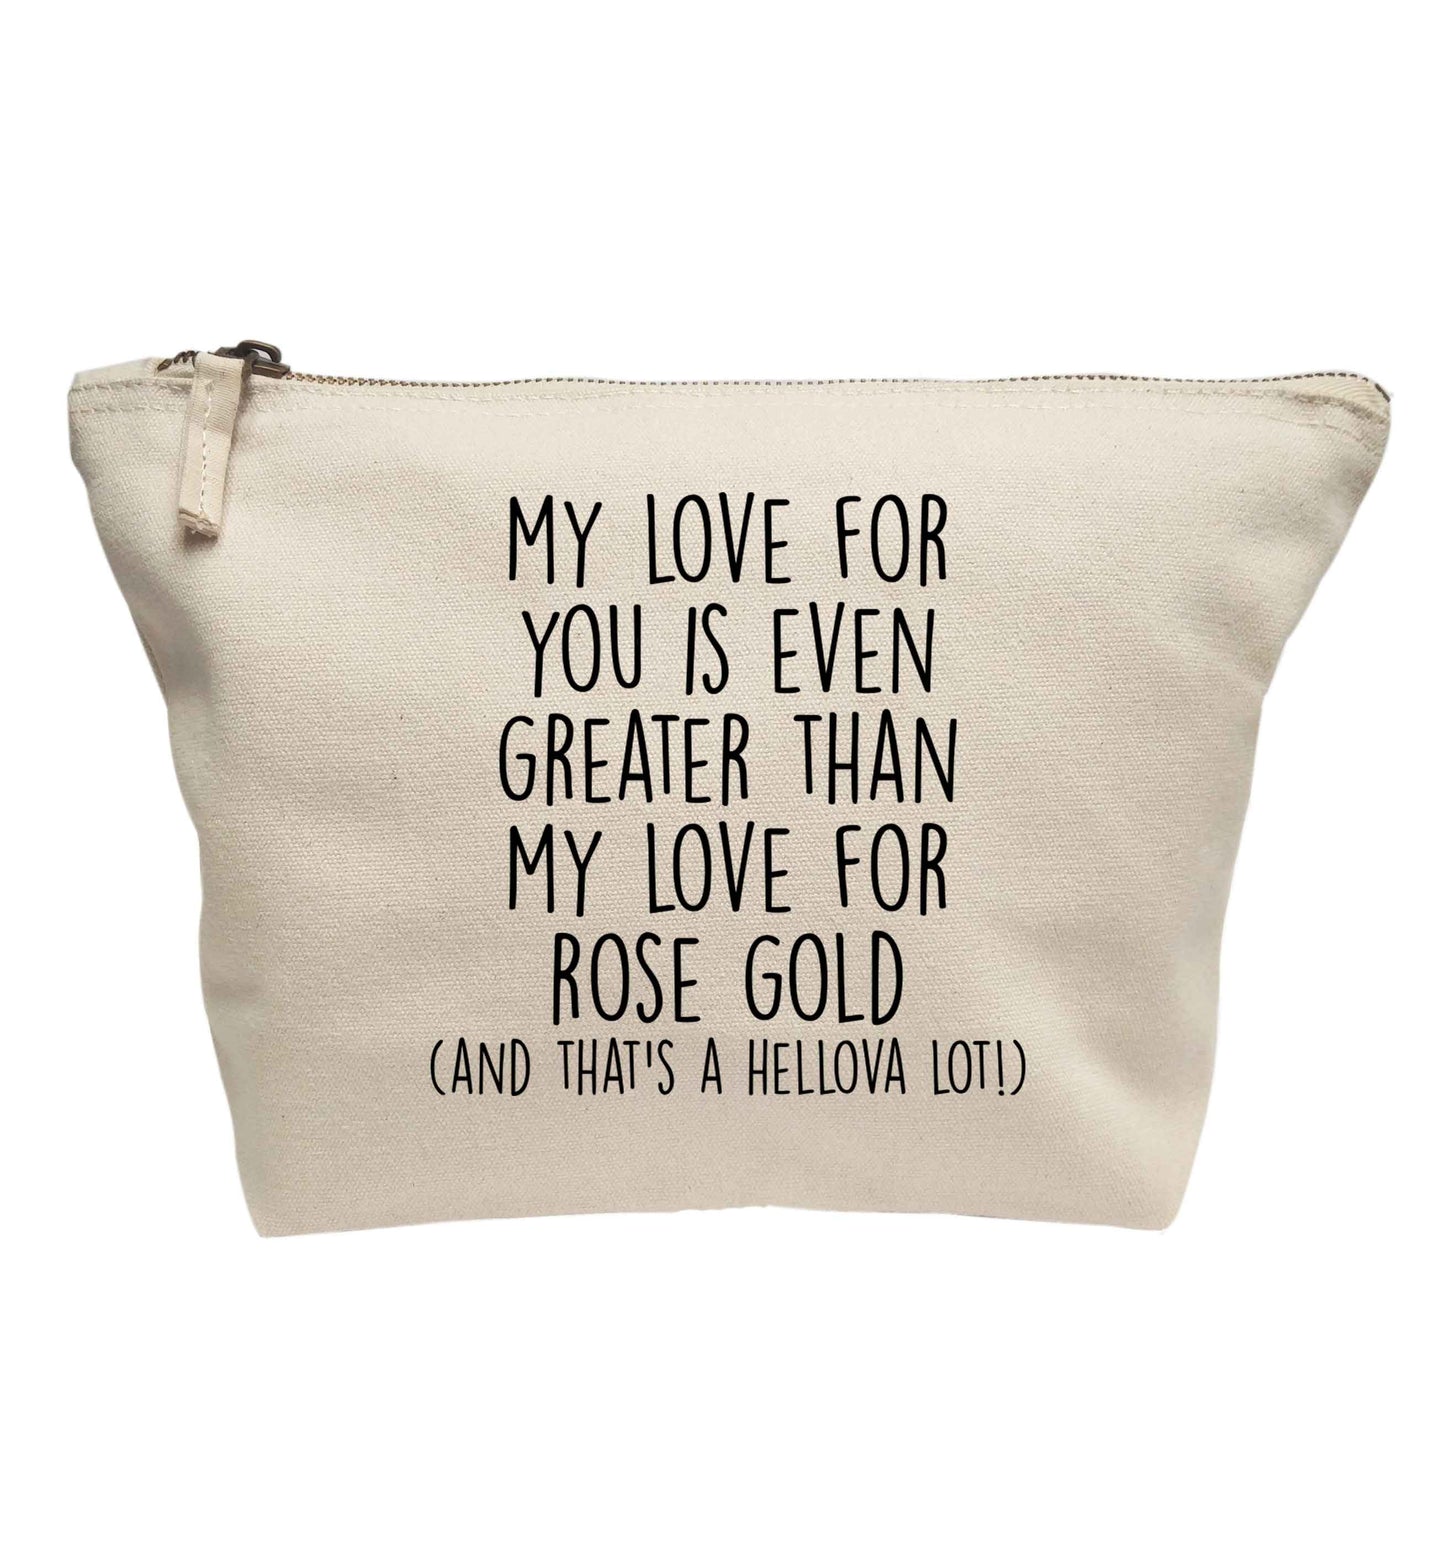 My love for you is even greater than my love for rose gold (and that's a hellova lot) | Makeup / wash bag